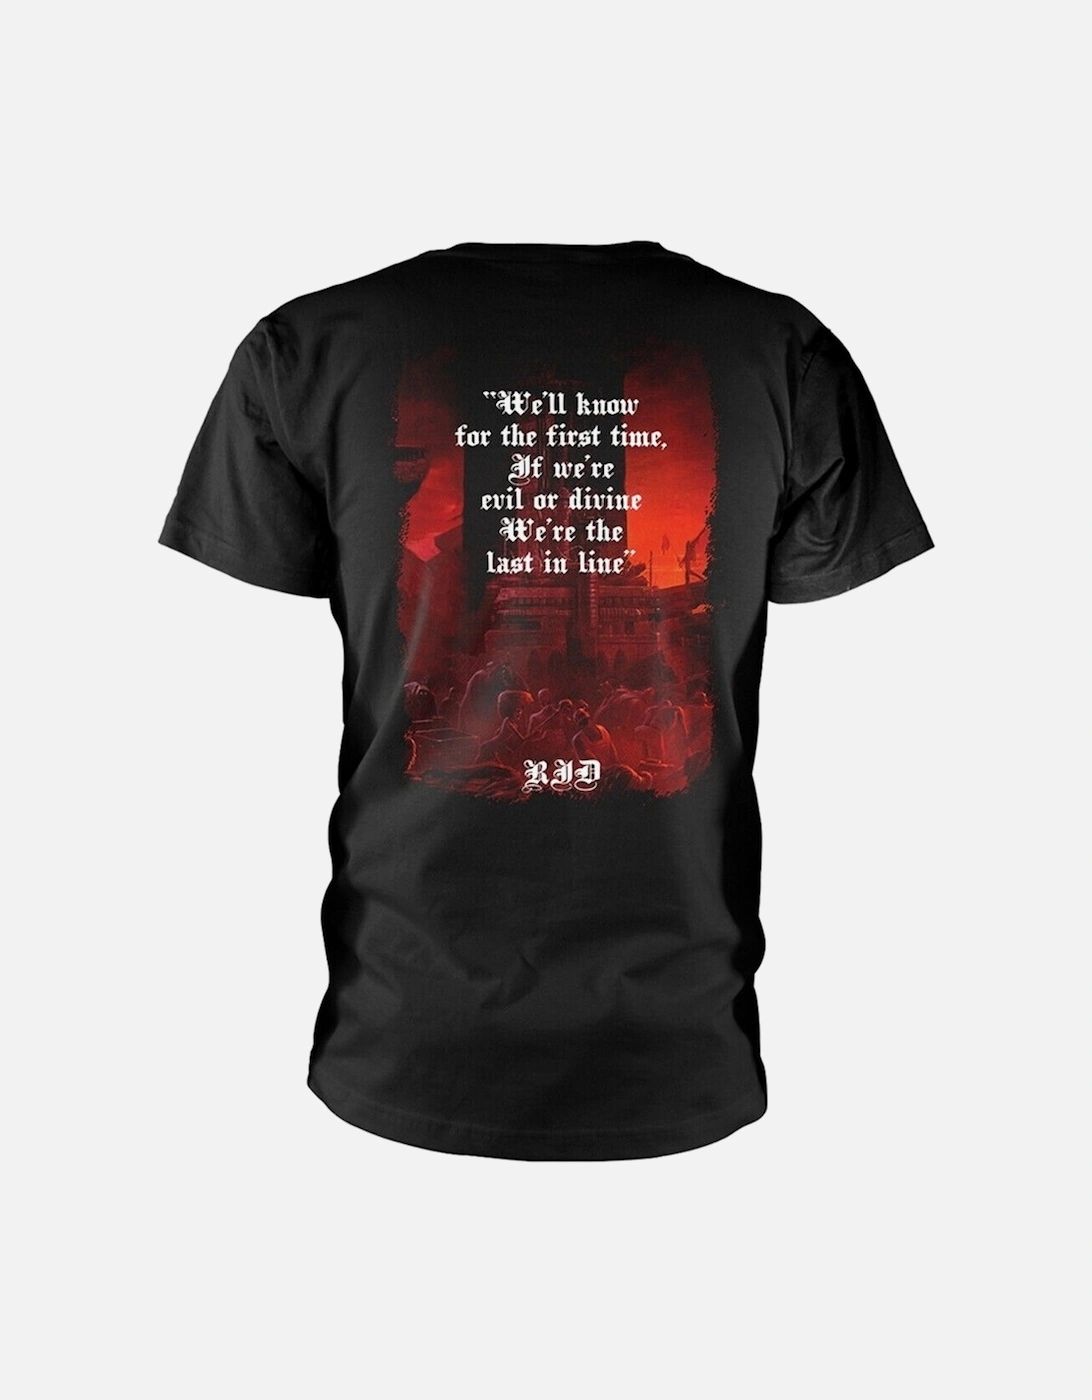 Unisex Adult The Last In Line T-Shirt